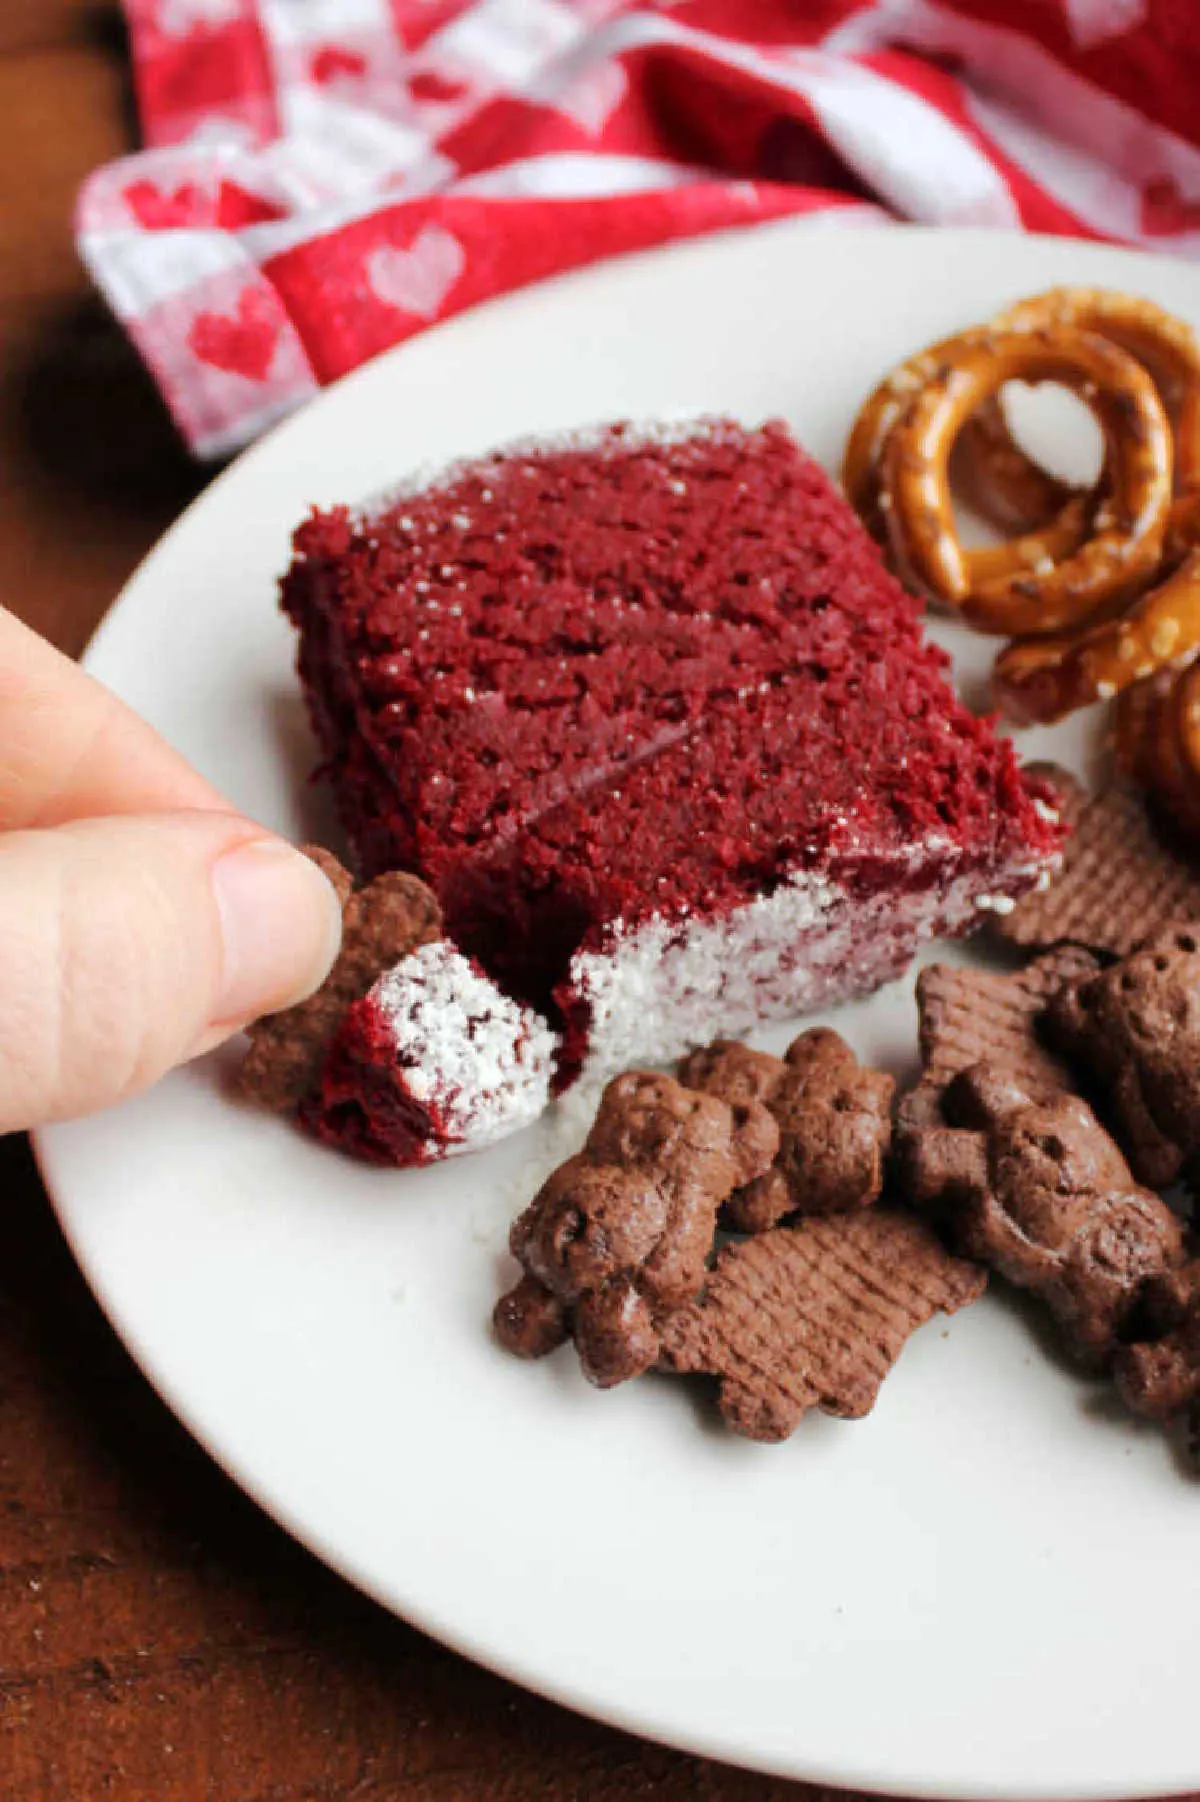 plate with helping of red velvet cheese ball, cookies and pretzels ready to eat.